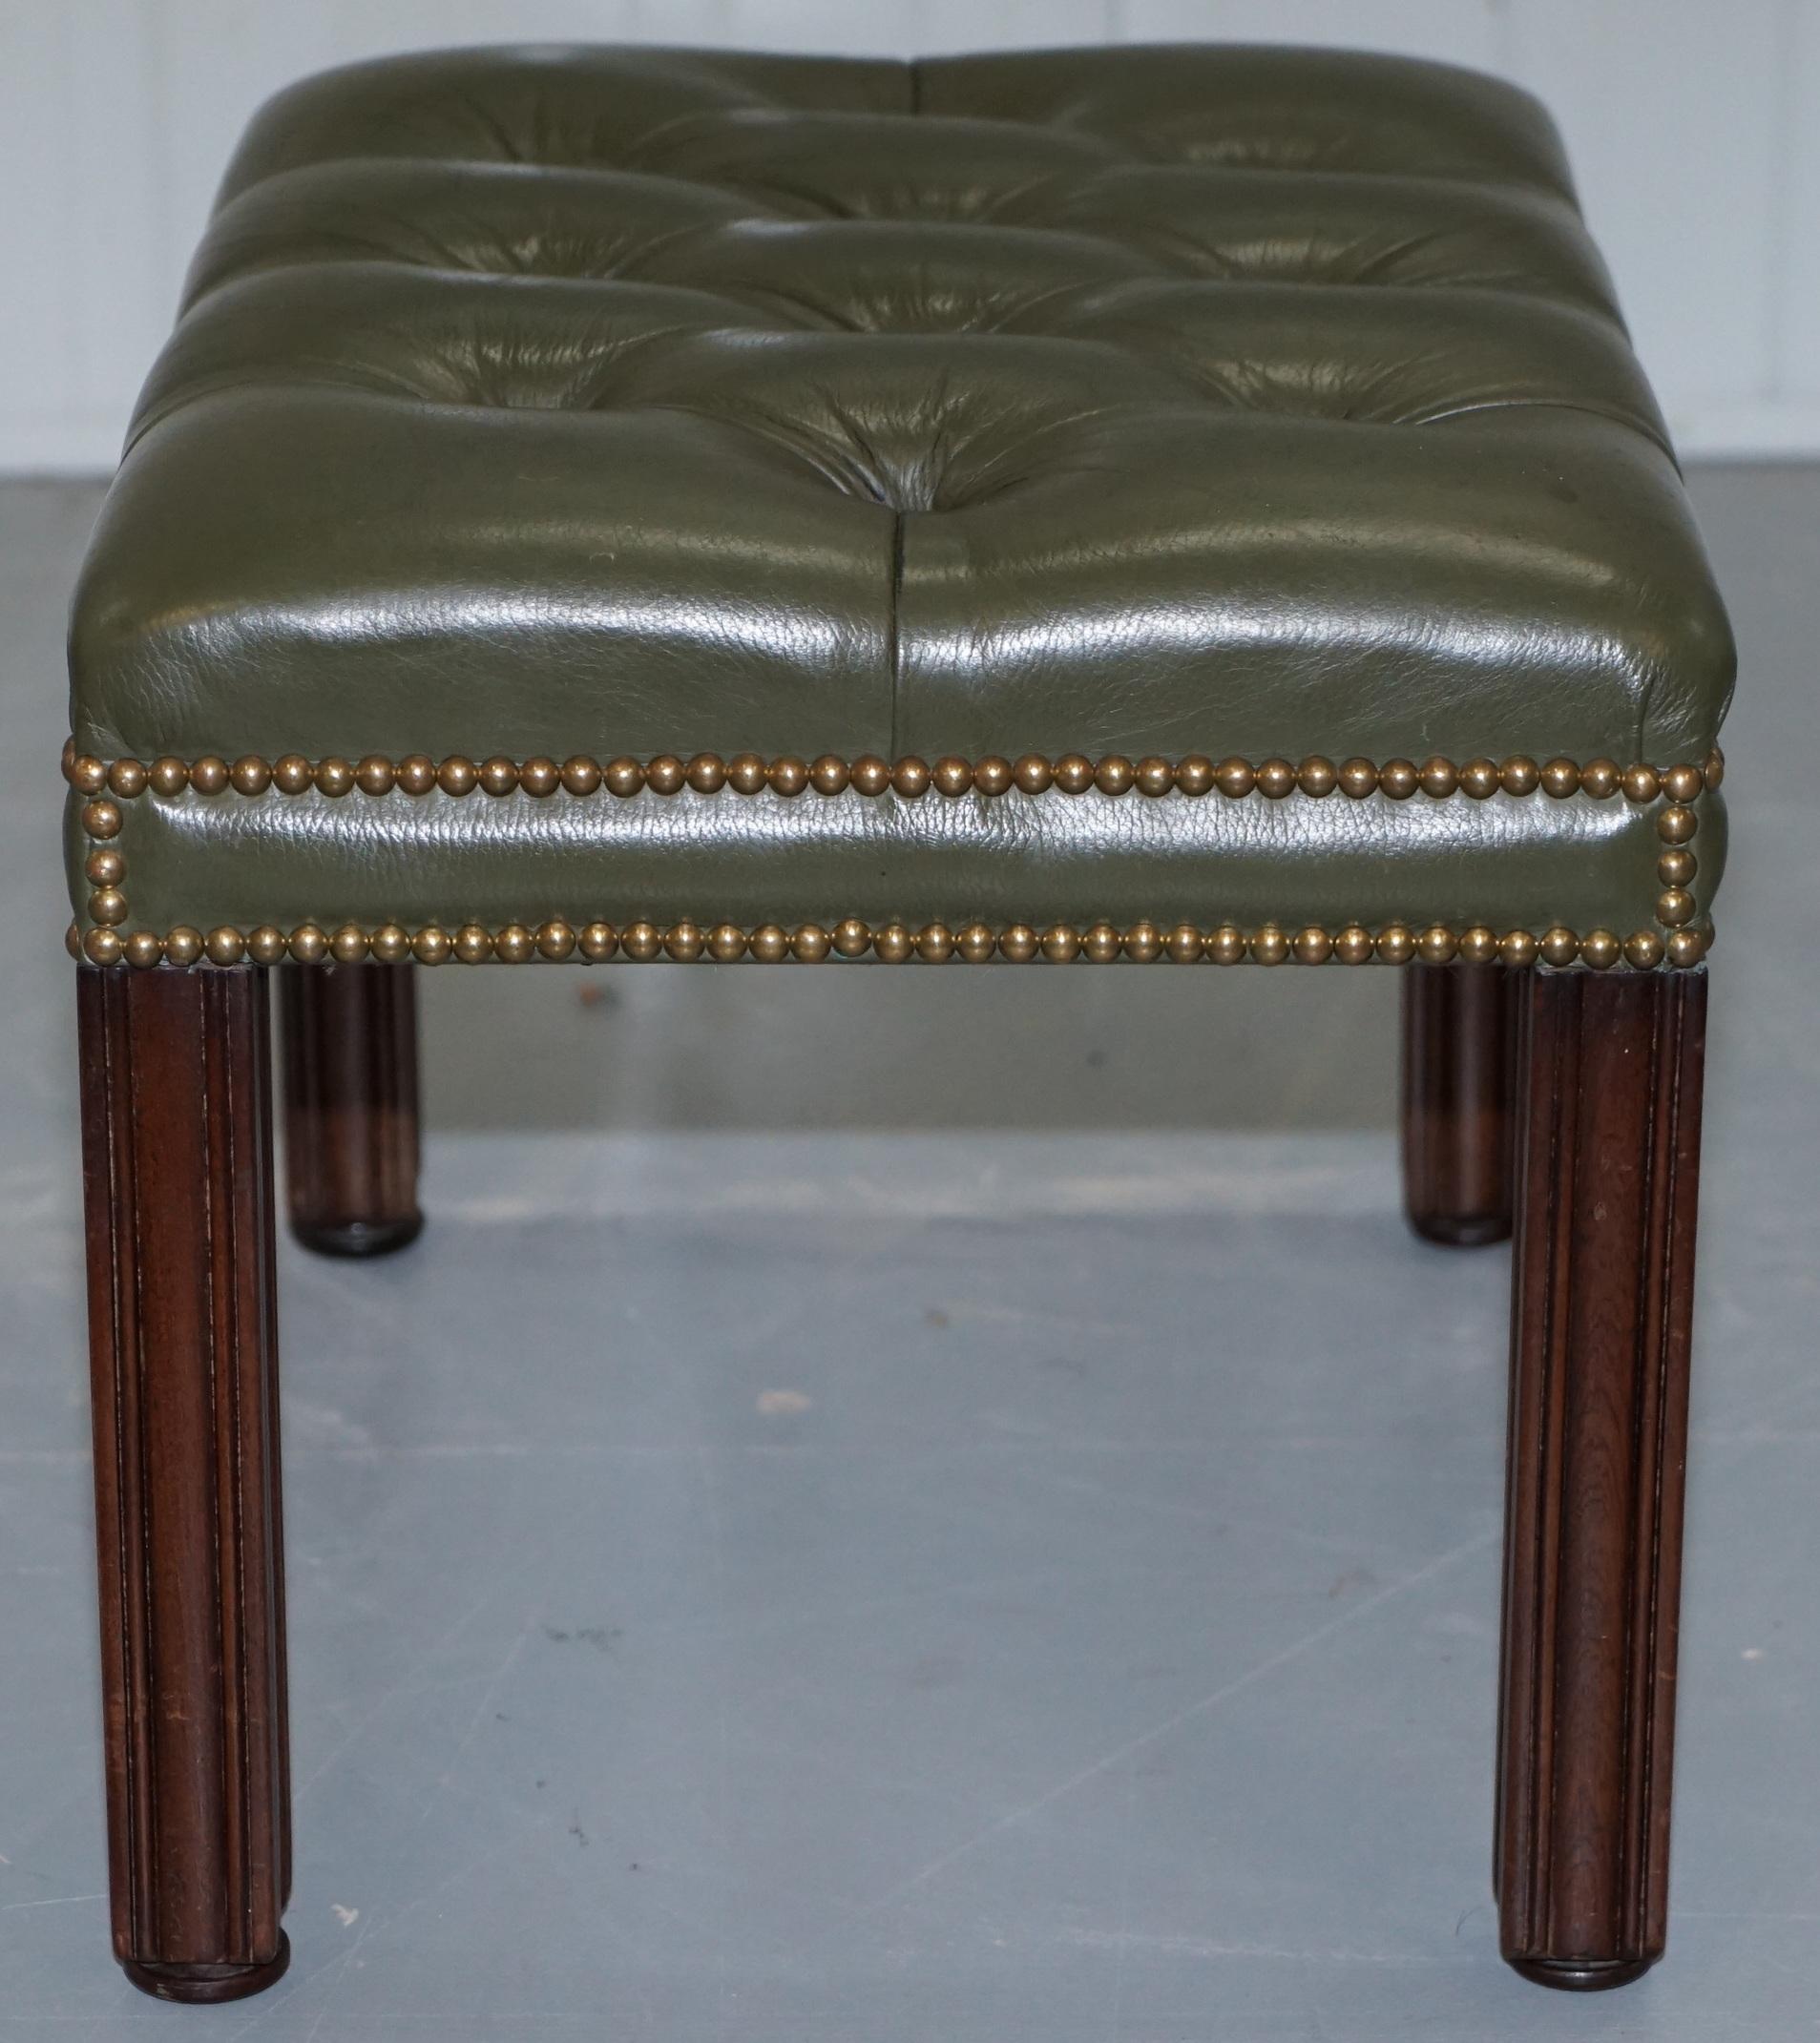 20th Century Aged Green Leather Chesterfield Mahogany Framed Footstool for Club Armchairs